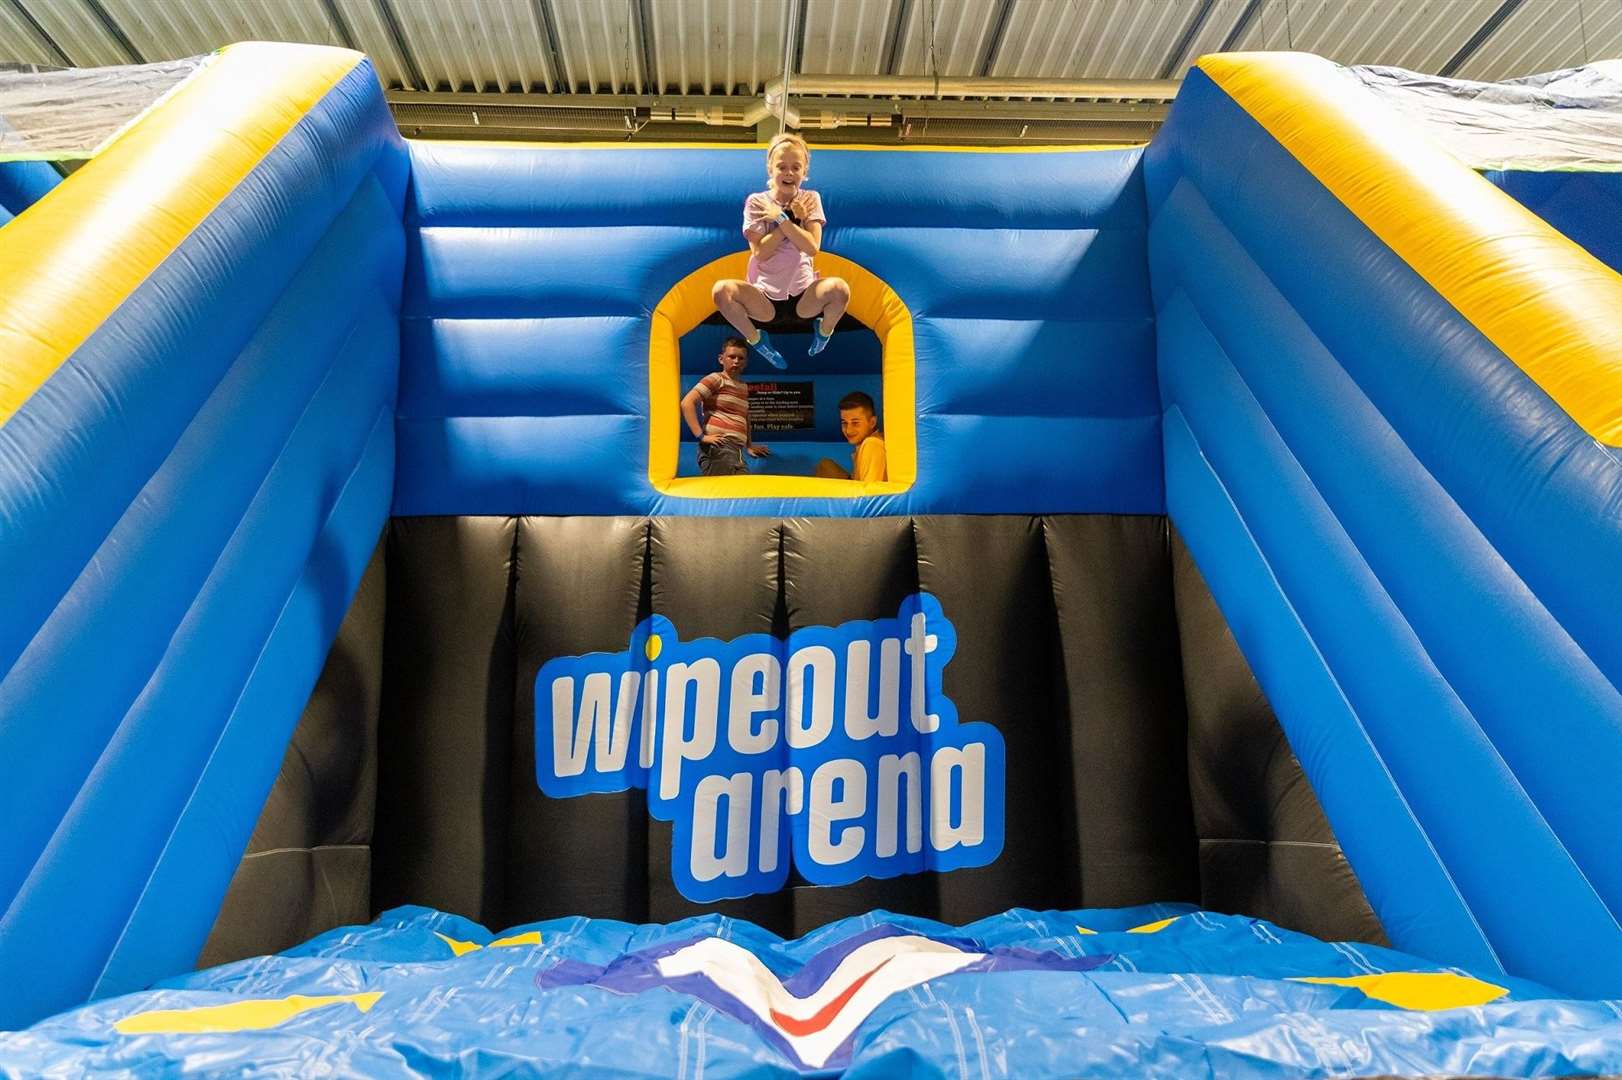 Wipeout Arena is coming to Meopham